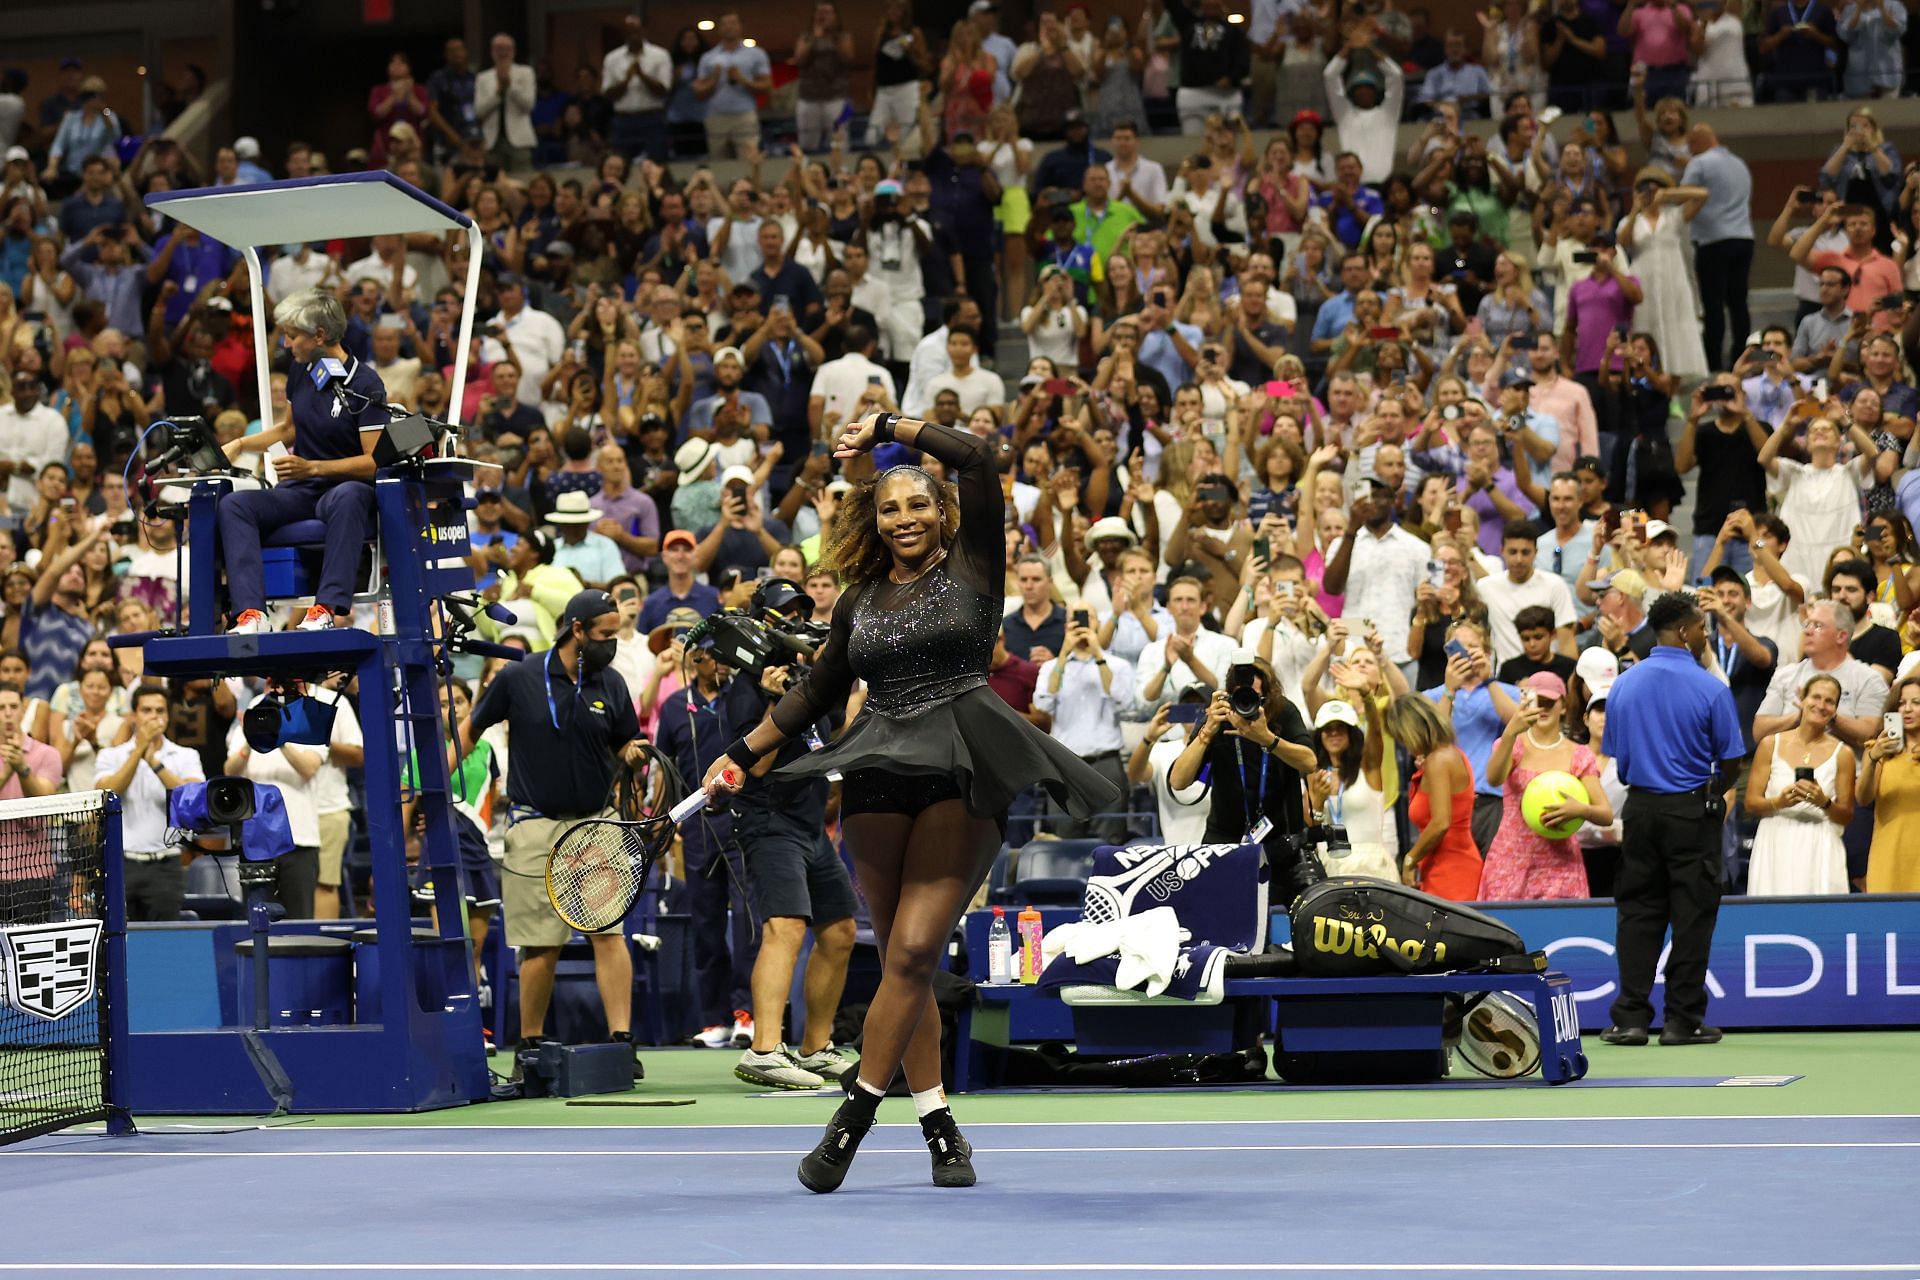 Serena Williams does her traditional post-match celebration, a twirl, after beating Danka Kovinic in the first round of the US Open.